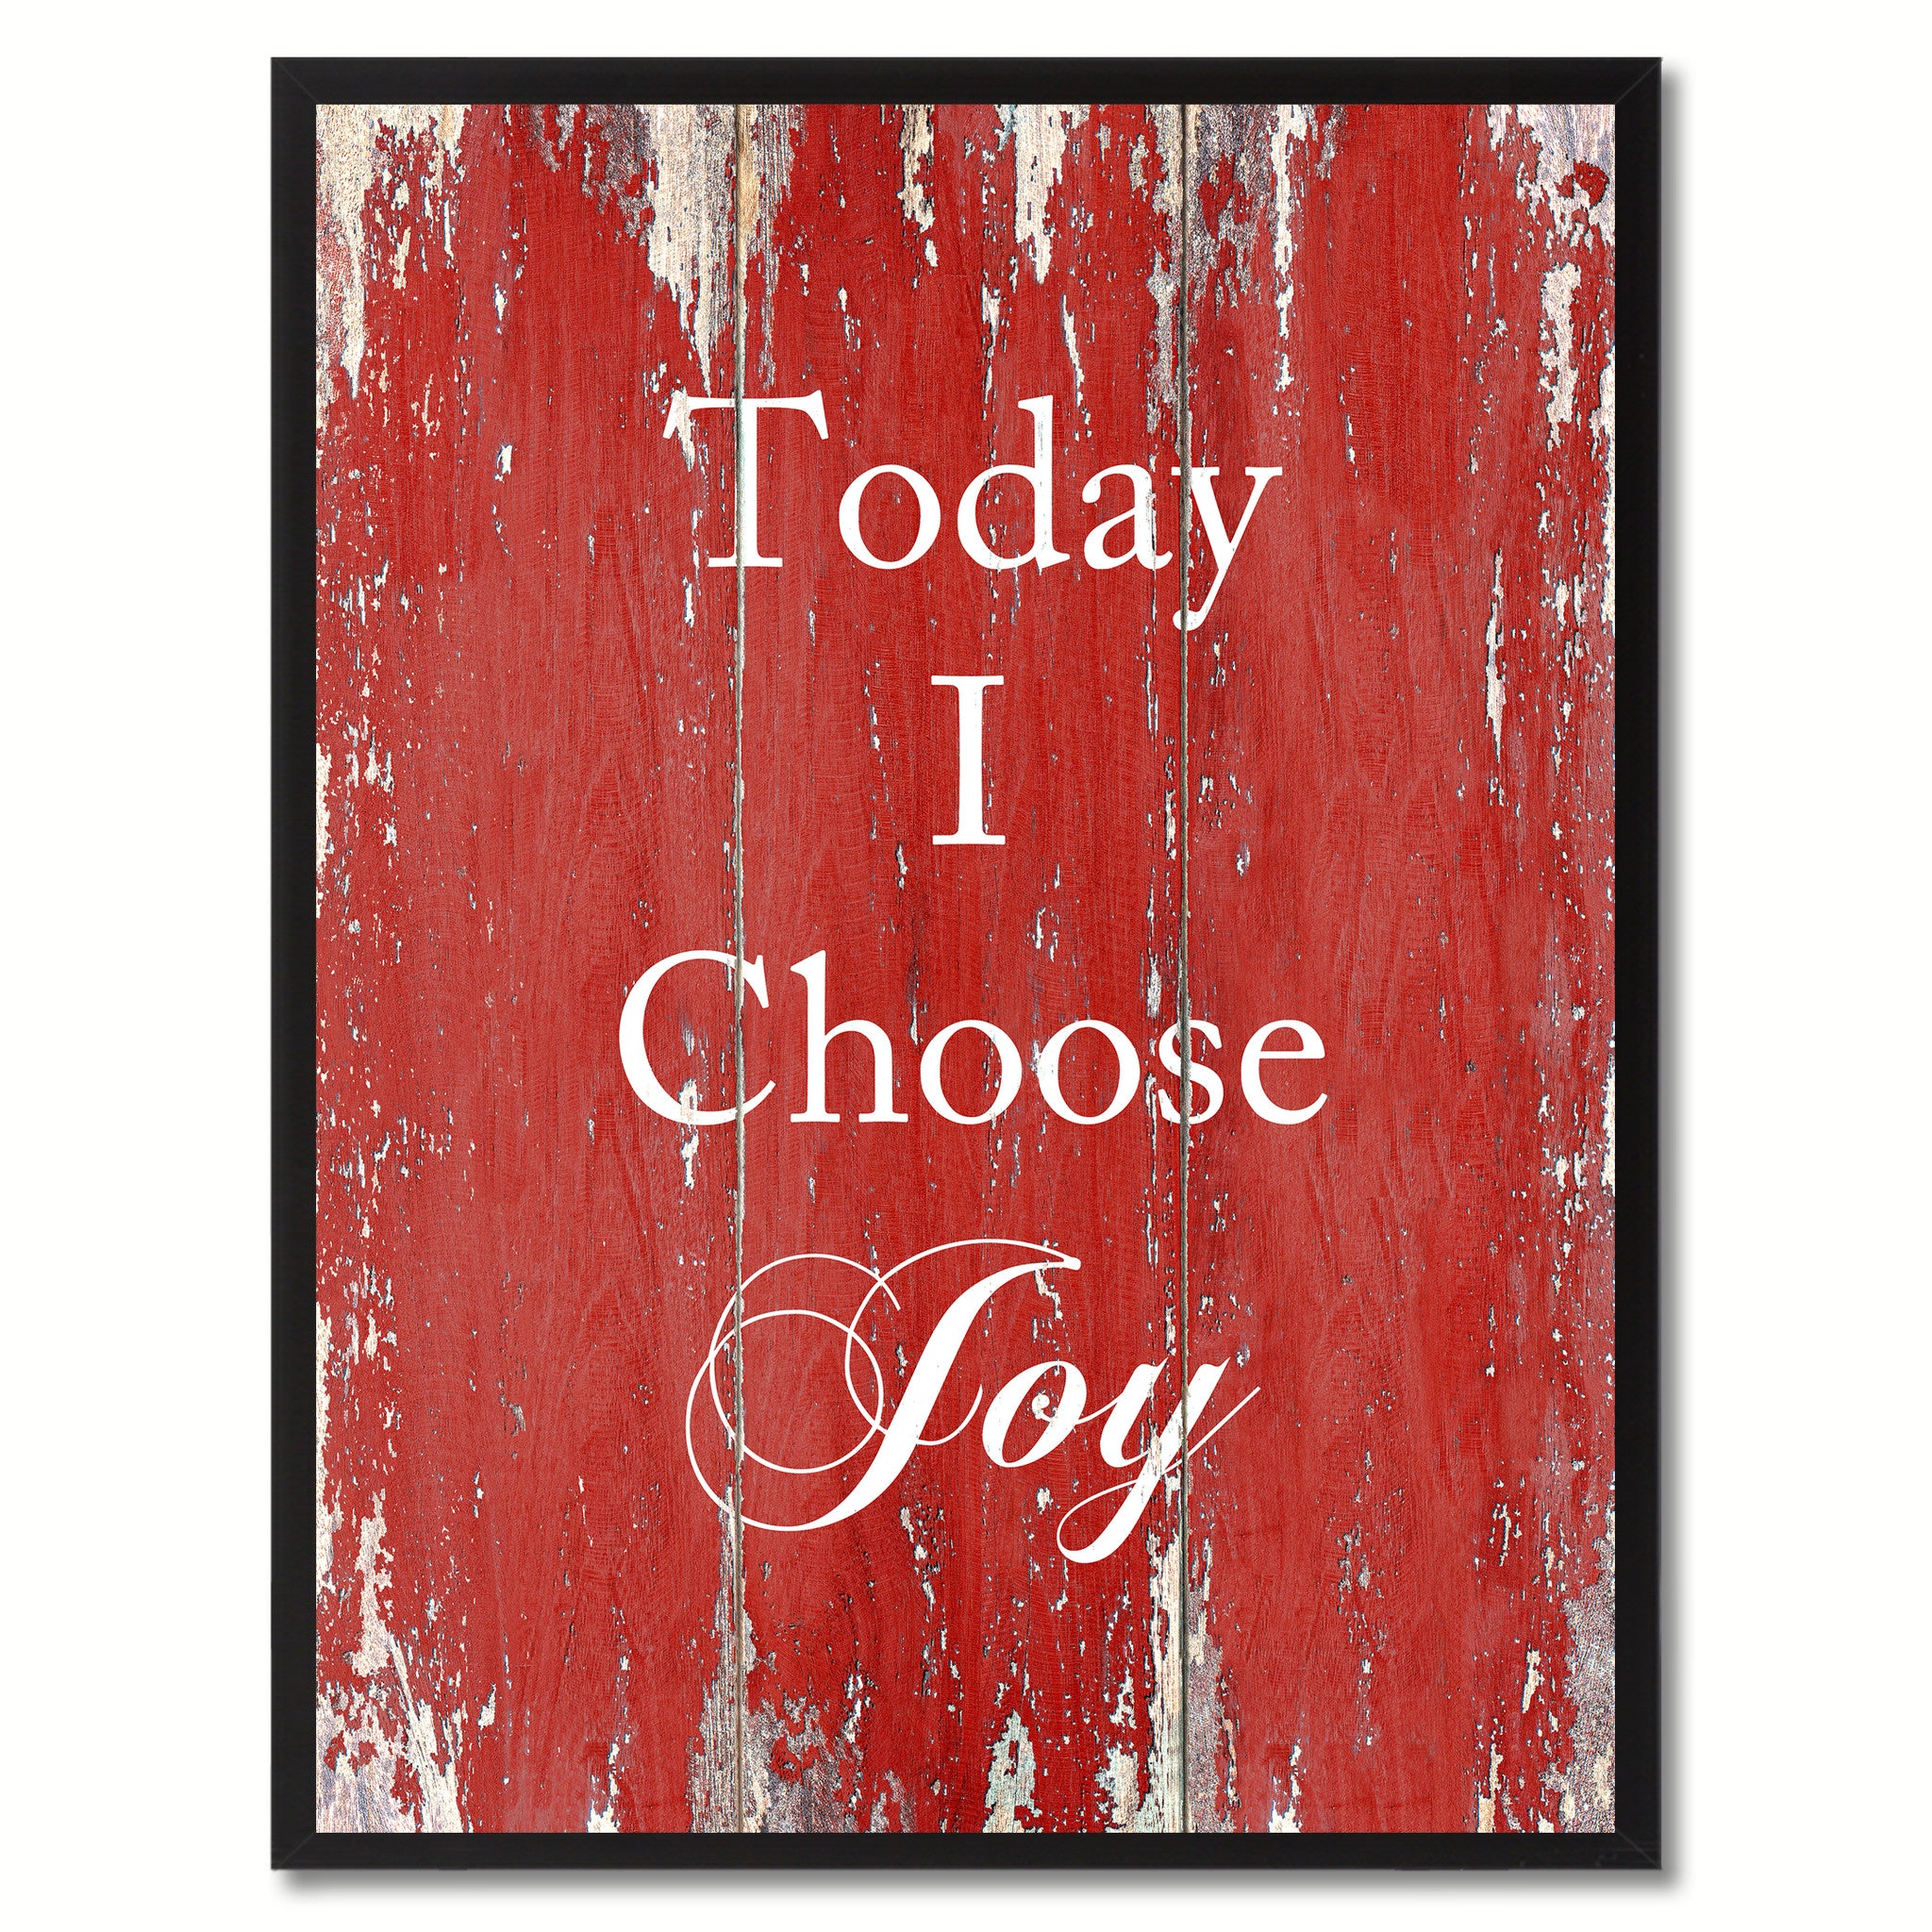 Today I Choose Joy Saying Canvas Print, Black Picture Frame Home Decor Wall Art Gifts